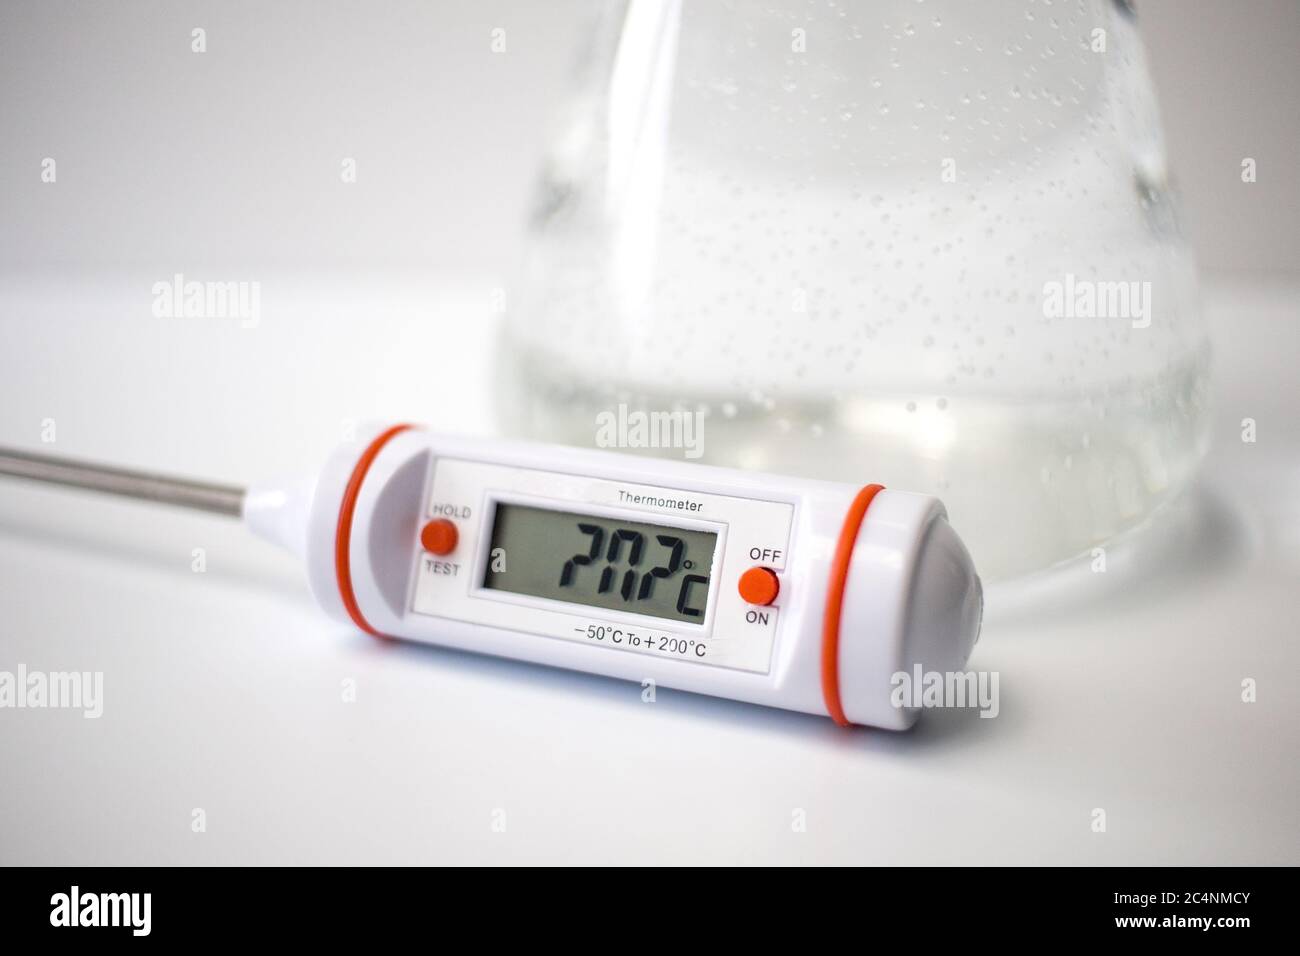 https://c8.alamy.com/comp/2C4NMCY/a-digital-thermometer-in-front-of-a-liquid-in-a-glass-erlenmeyer-flask-on-a-white-background-science-experiment-2C4NMCY.jpg